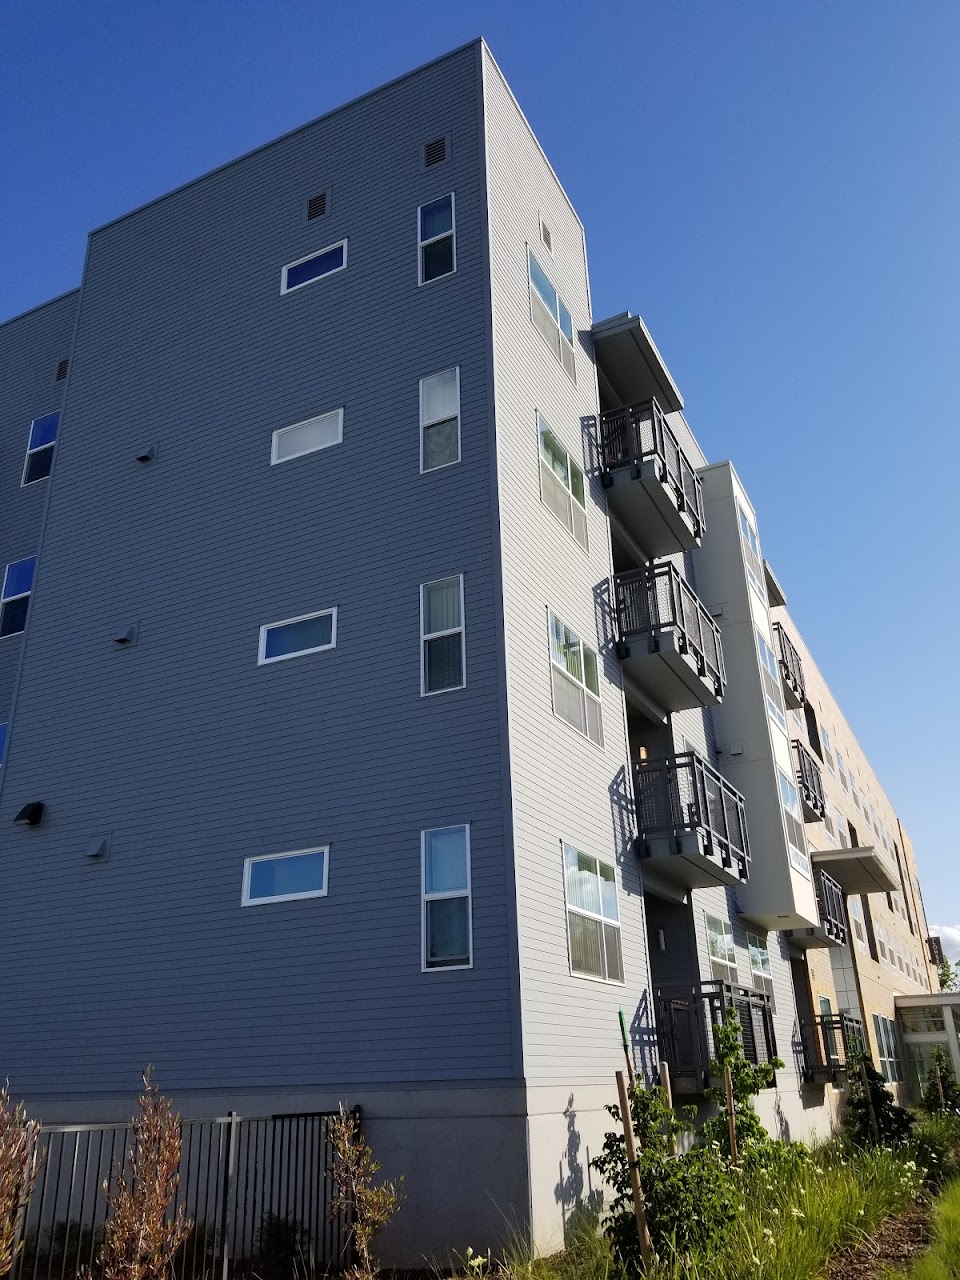 Photo of THE FREDERIC LOSHE APARTMENTS at 623 VERNON STREET ROSEVILLE, CA 95678